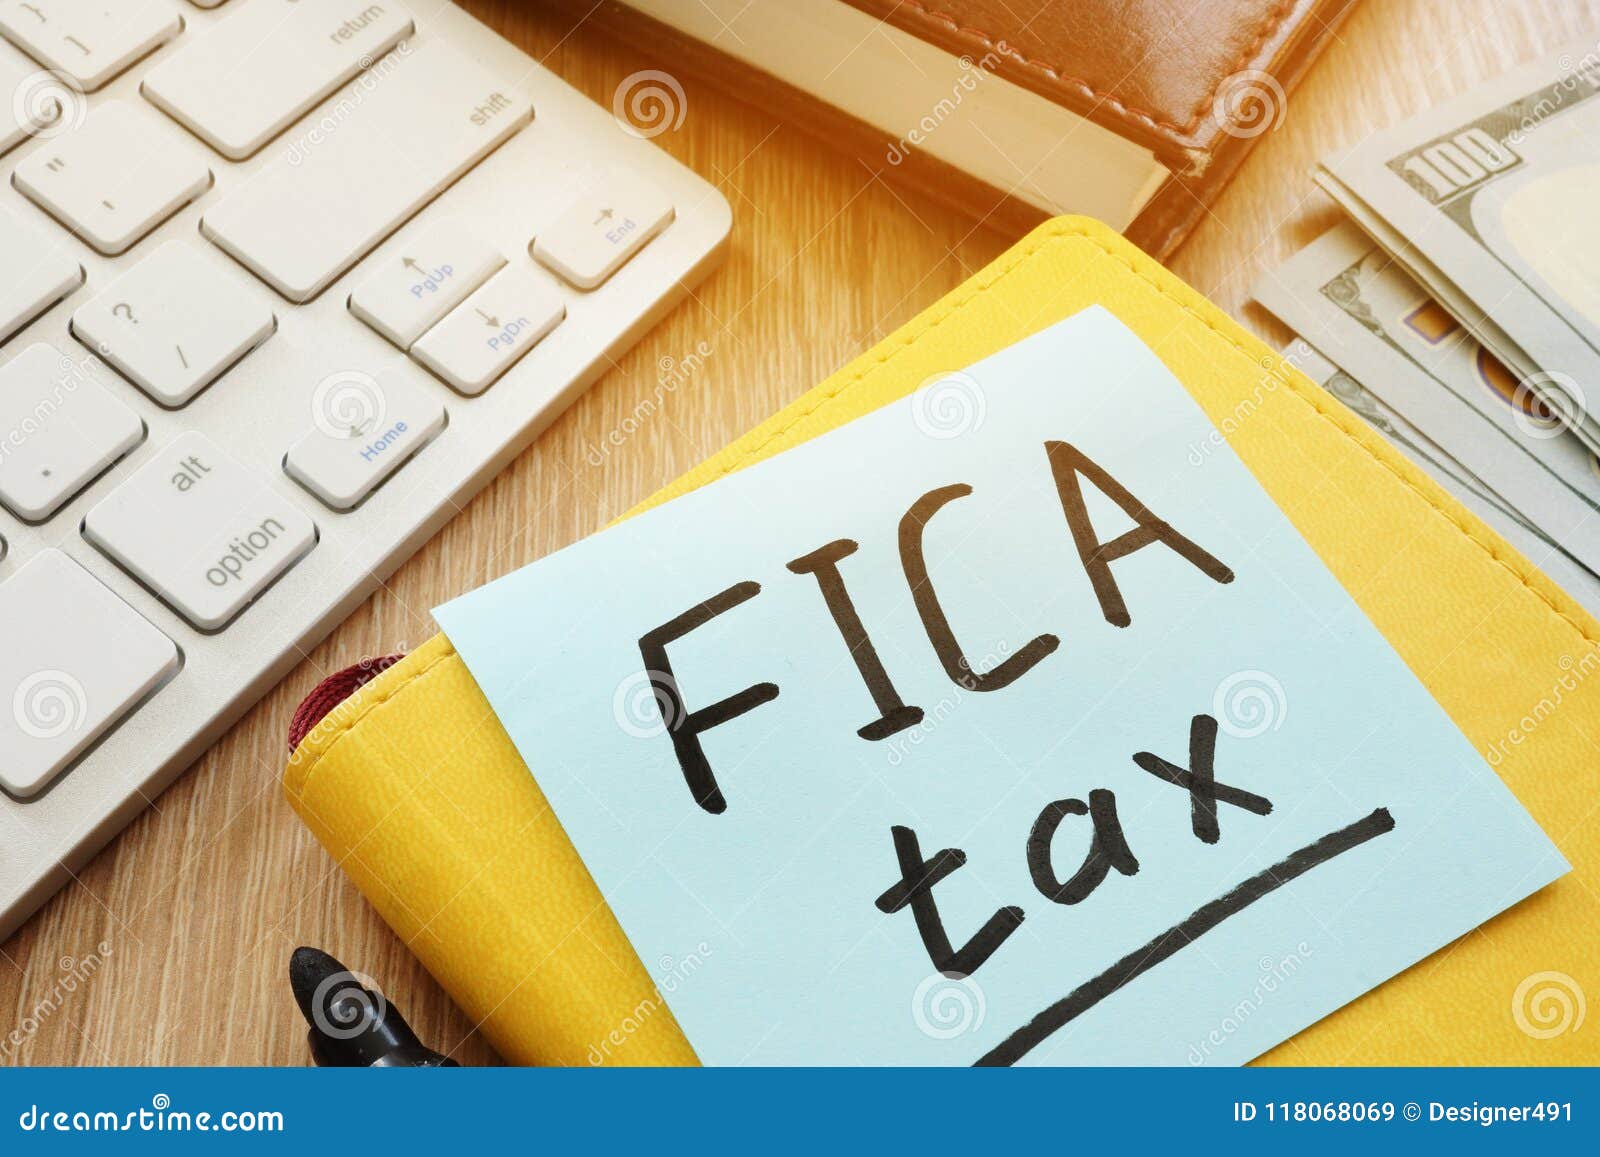 stick with words fica tax and keyboard.